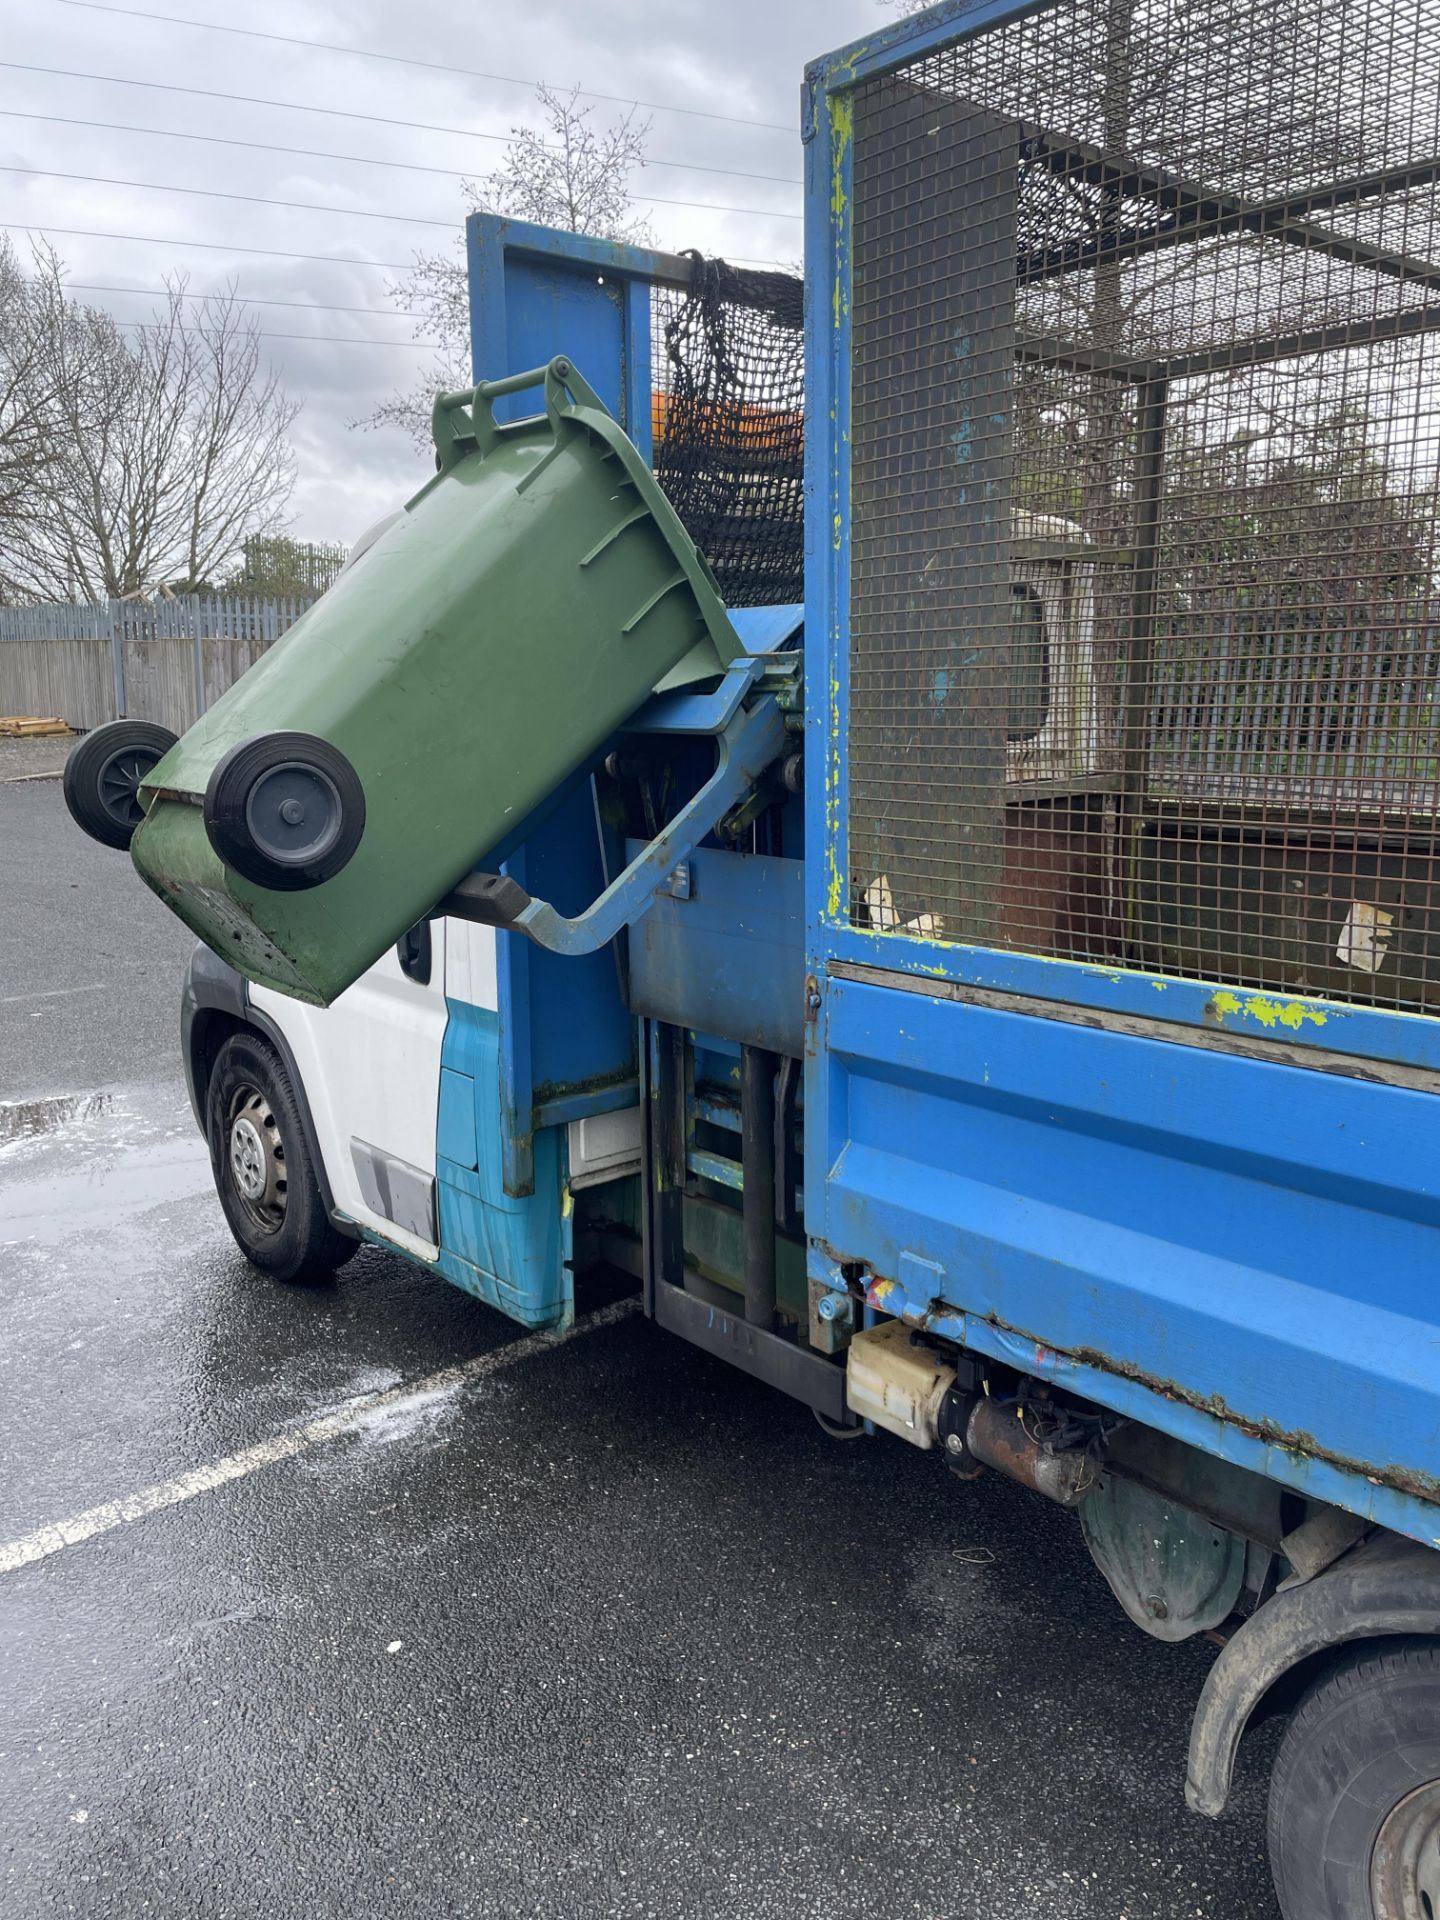 Citroen Relay Caged Tipper with rare Wheelie Bin Lift (39568) - Image 15 of 19